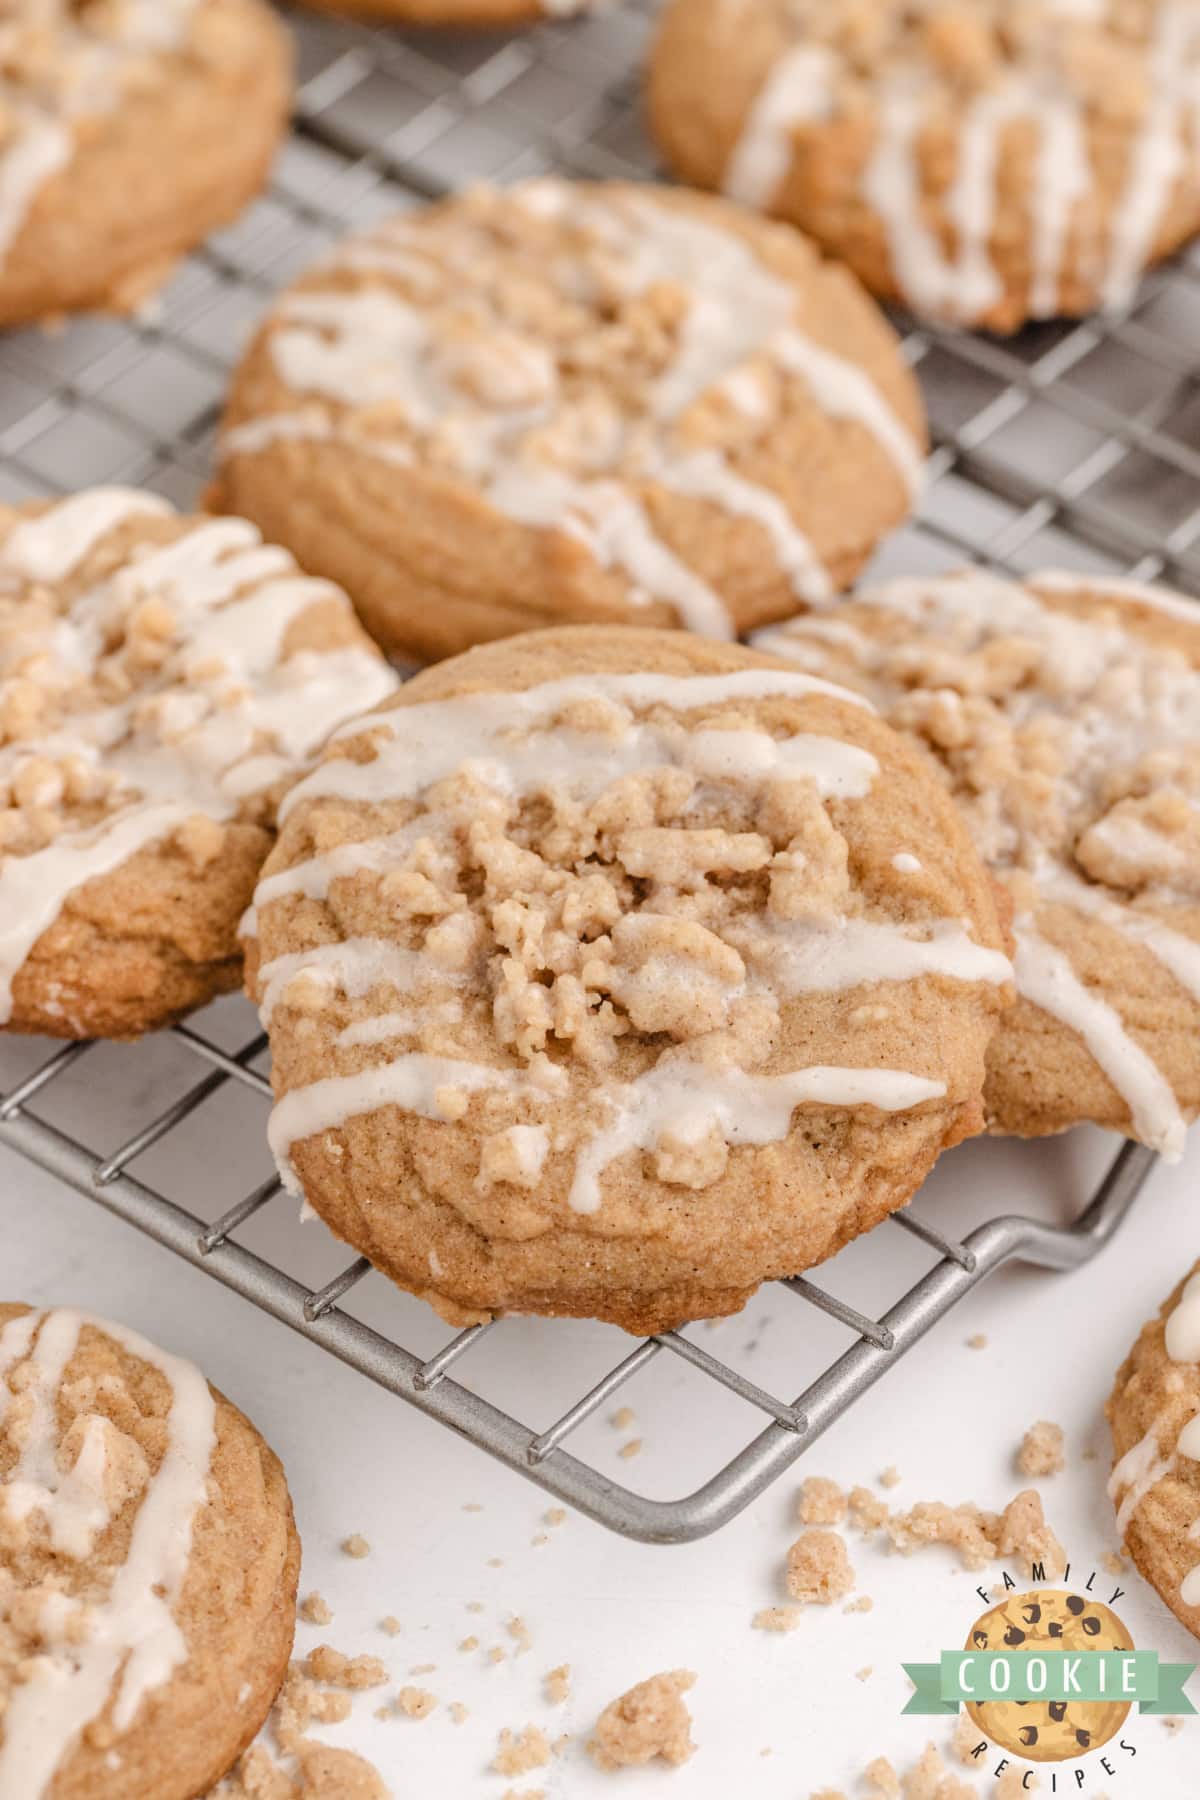 Coffee Cake Cookies are soft, chewy cinnamon cookies topped with a buttery streusel crumb topping and a drizzle of vanilla icing.